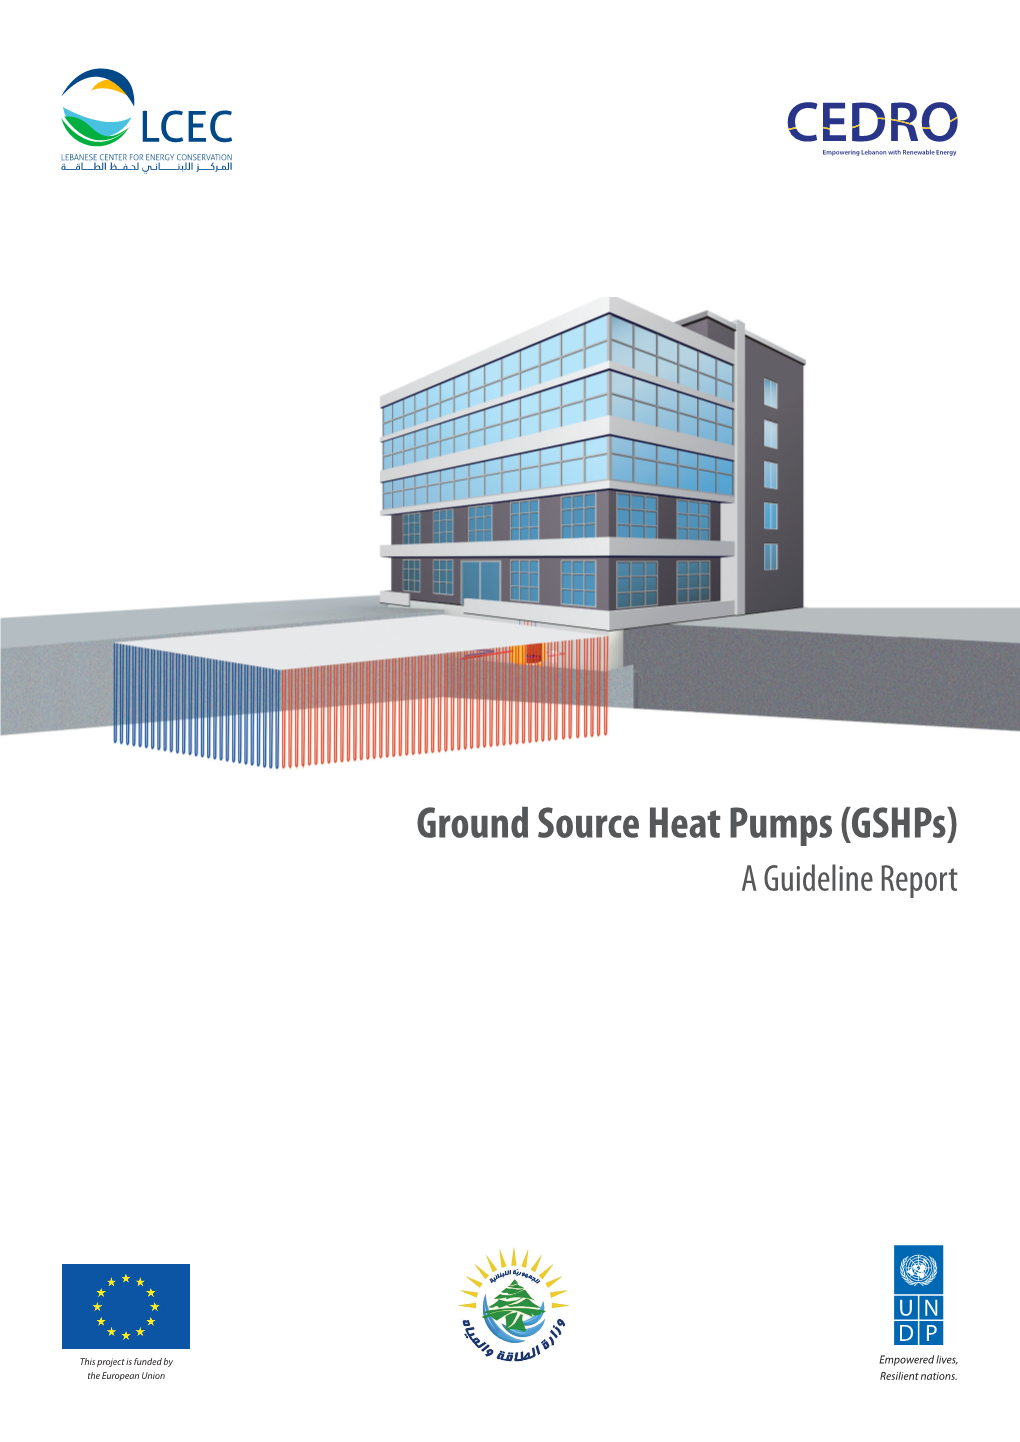 Ground Source Heat Pumps (Gshps) a Guideline Report